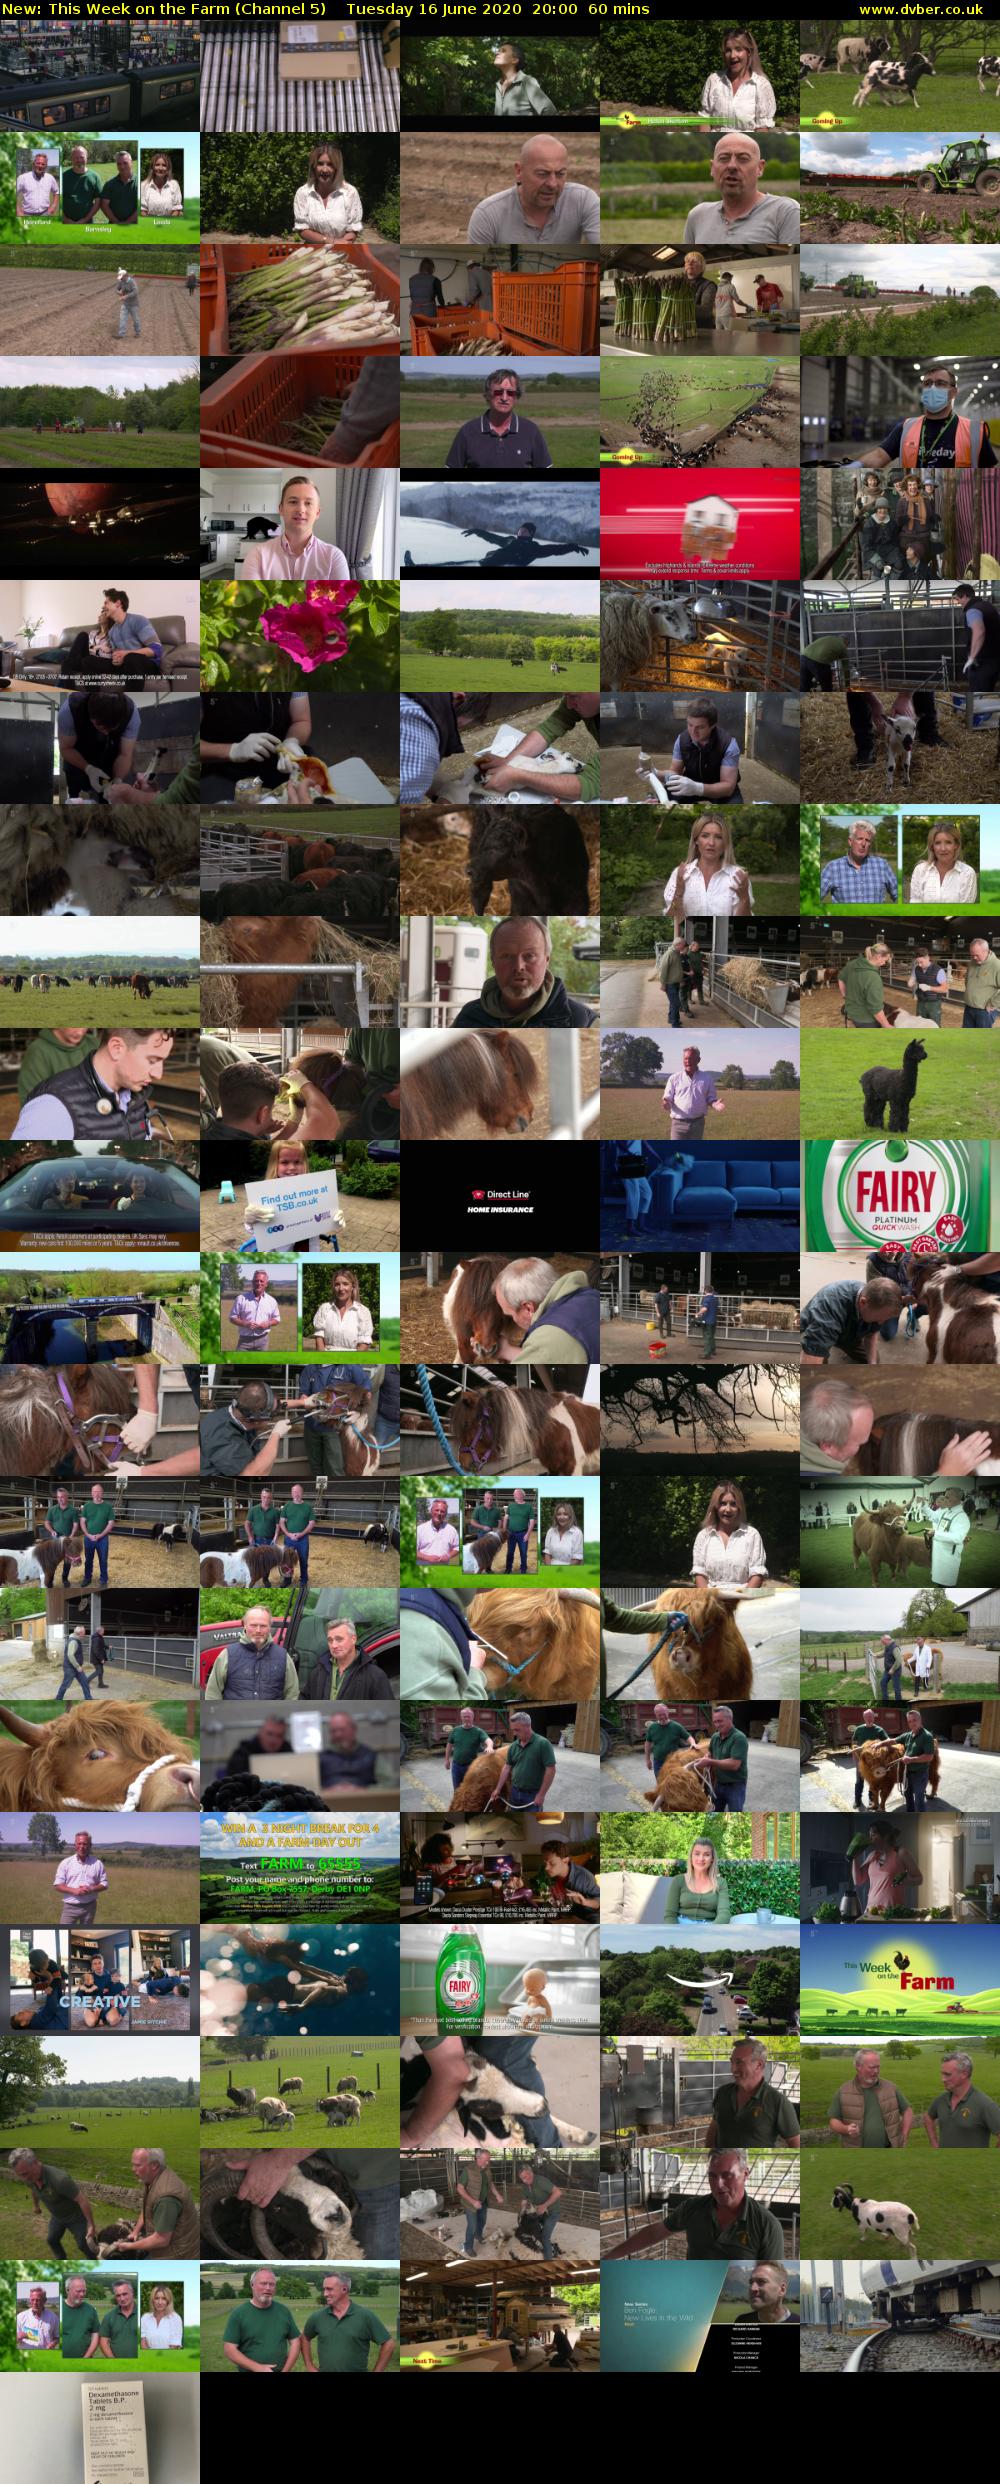 This Week on the Farm (Channel 5) Tuesday 16 June 2020 20:00 - 21:00